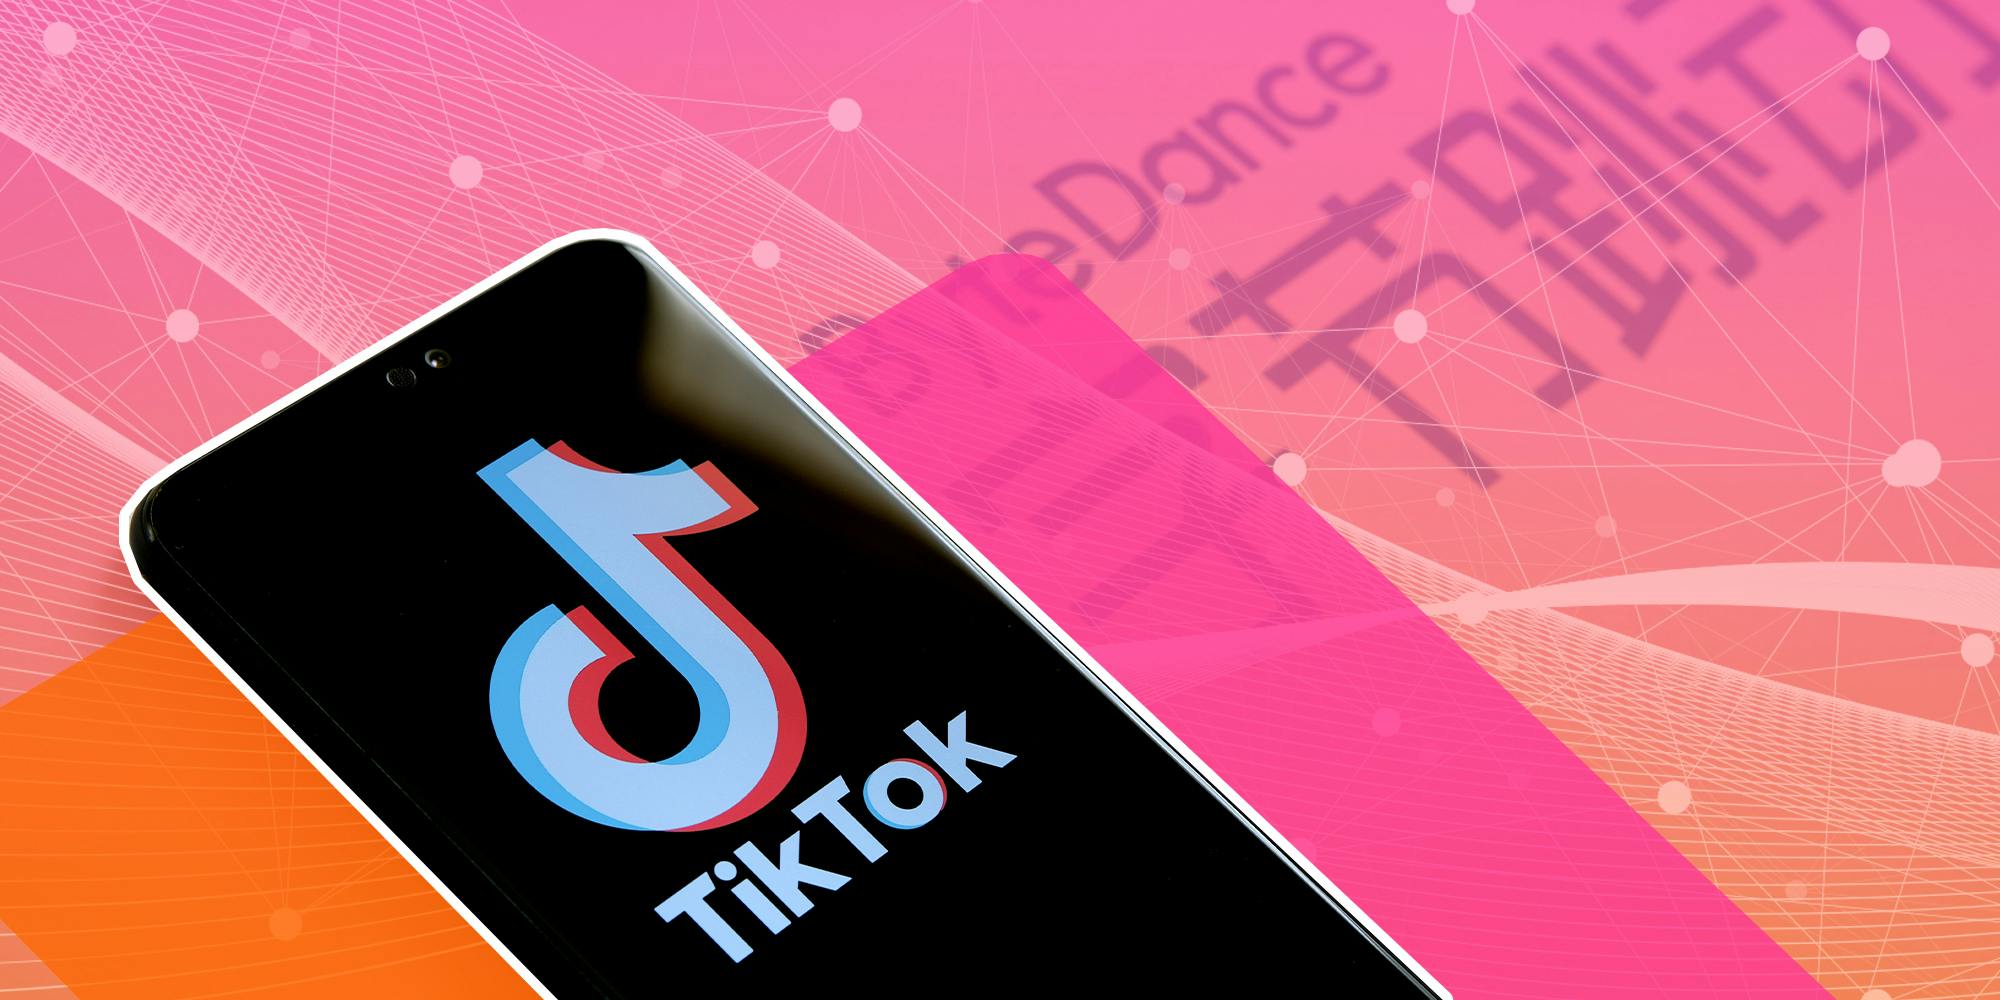 Ex-Employees Claim TikTok Shared Data With ByteDance Workers in China